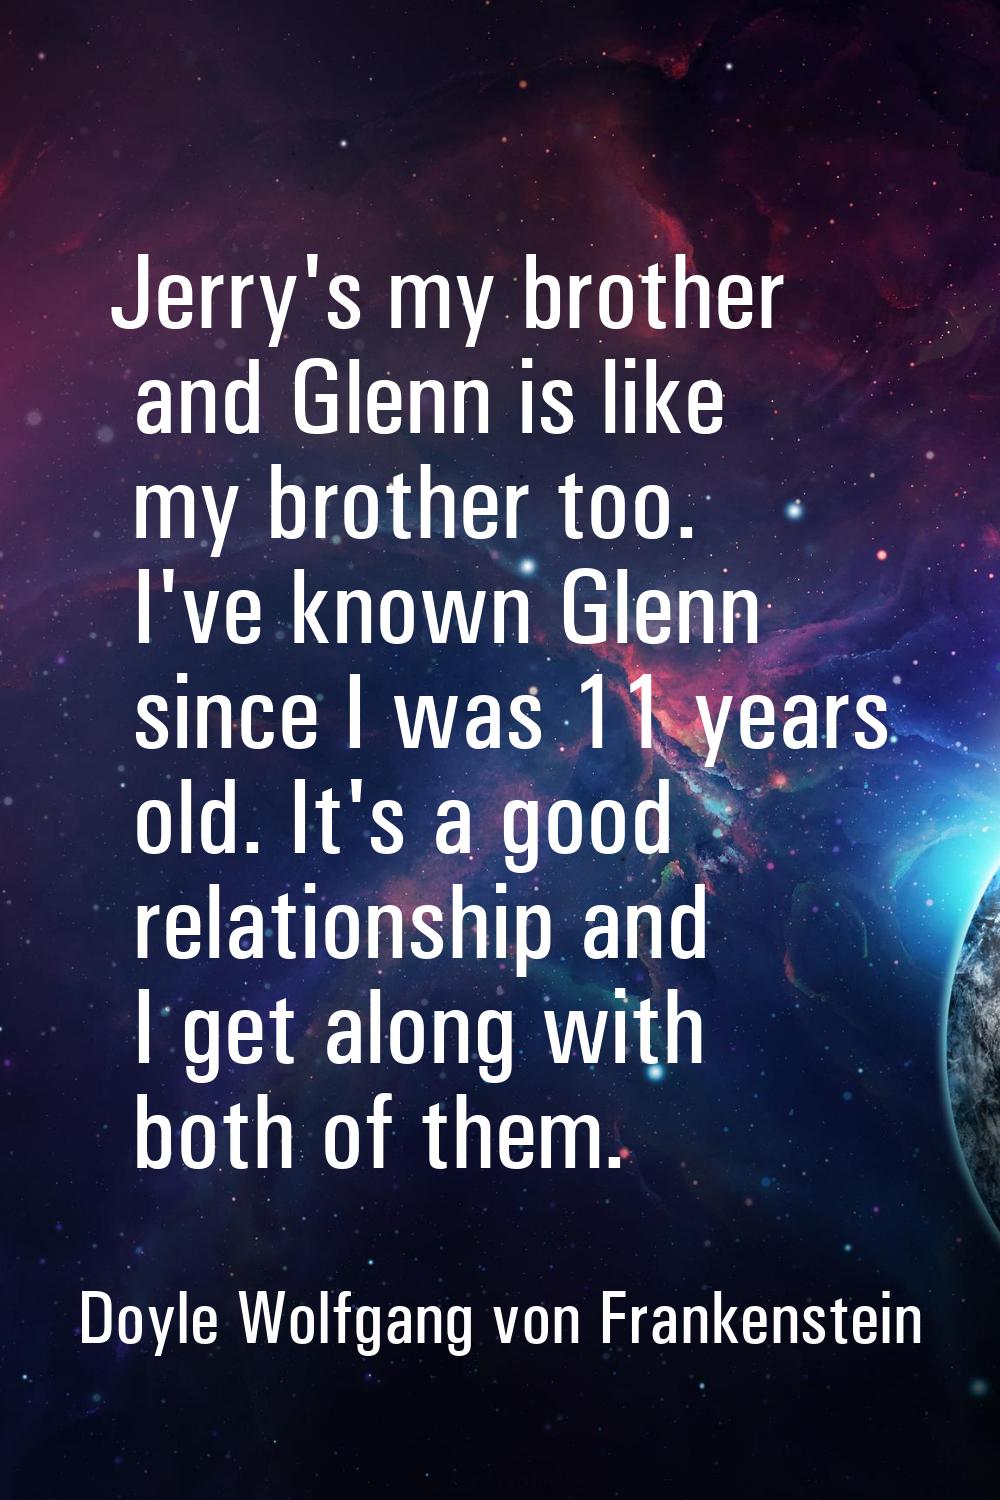 Jerry's my brother and Glenn is like my brother too. I've known Glenn since I was 11 years old. It'